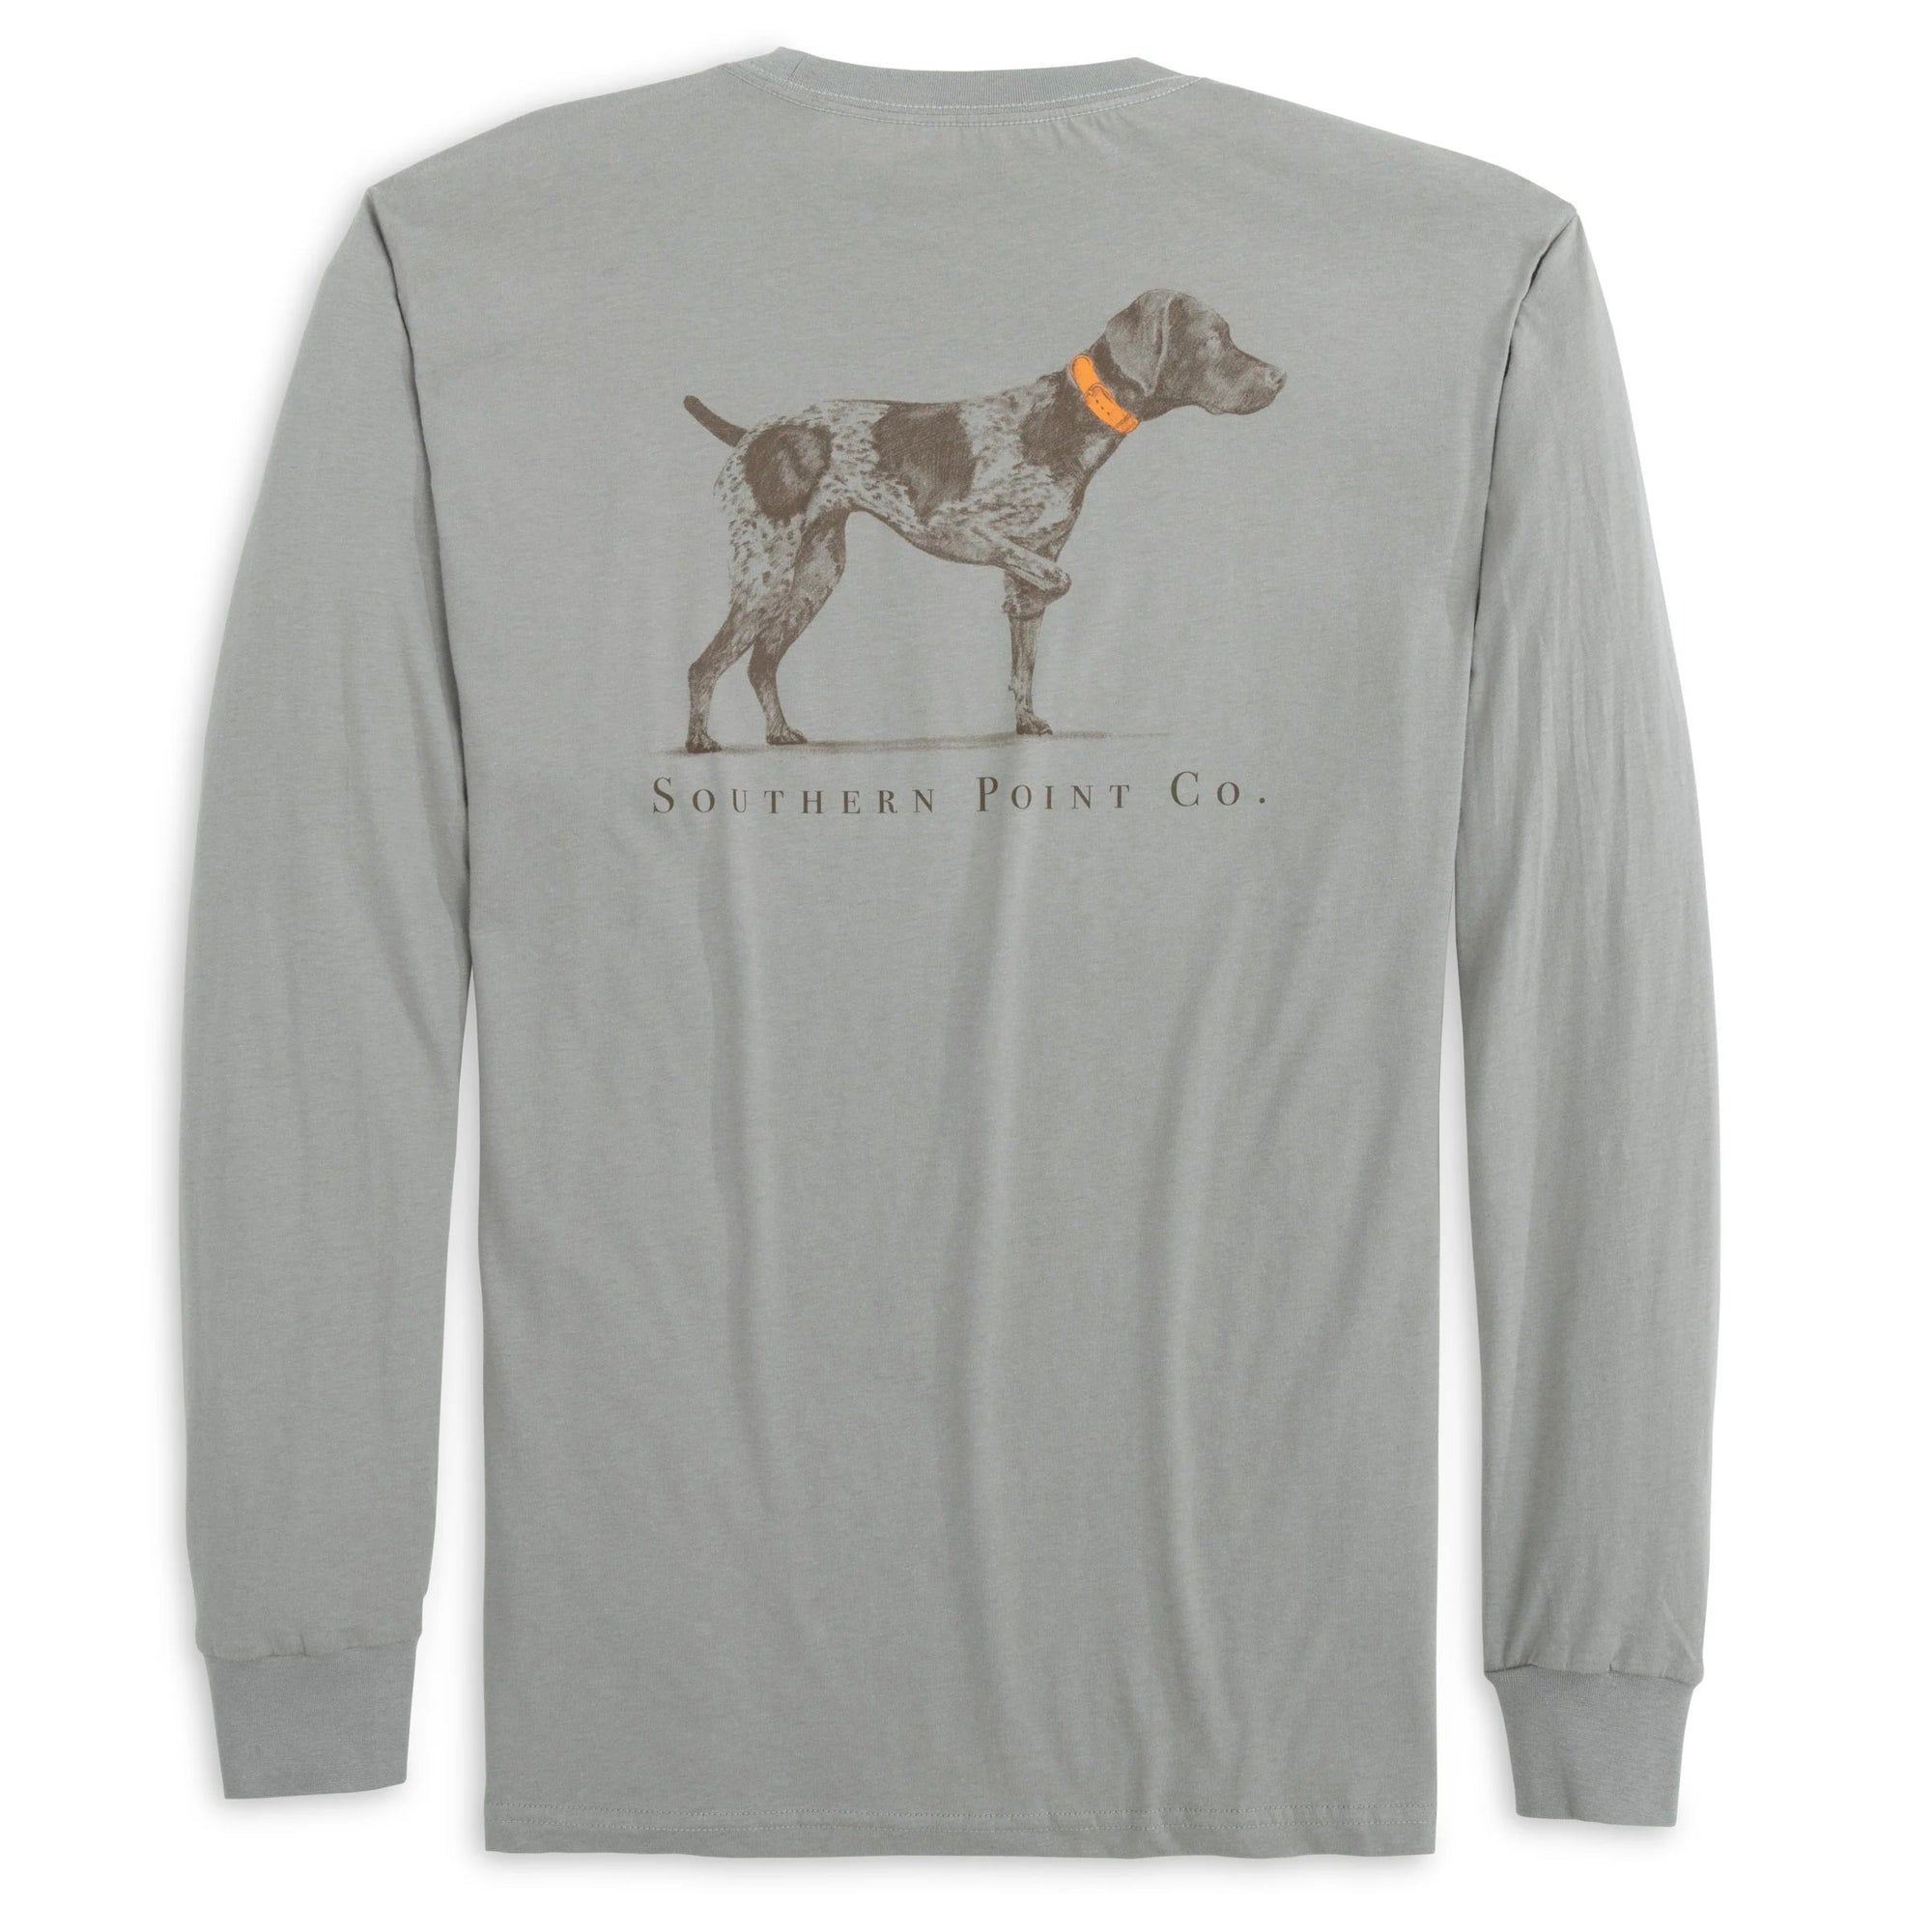 Southern Point Co. Men's Tees Southern Point Greyton Detail Long Sleeve Tee || David's Clothing